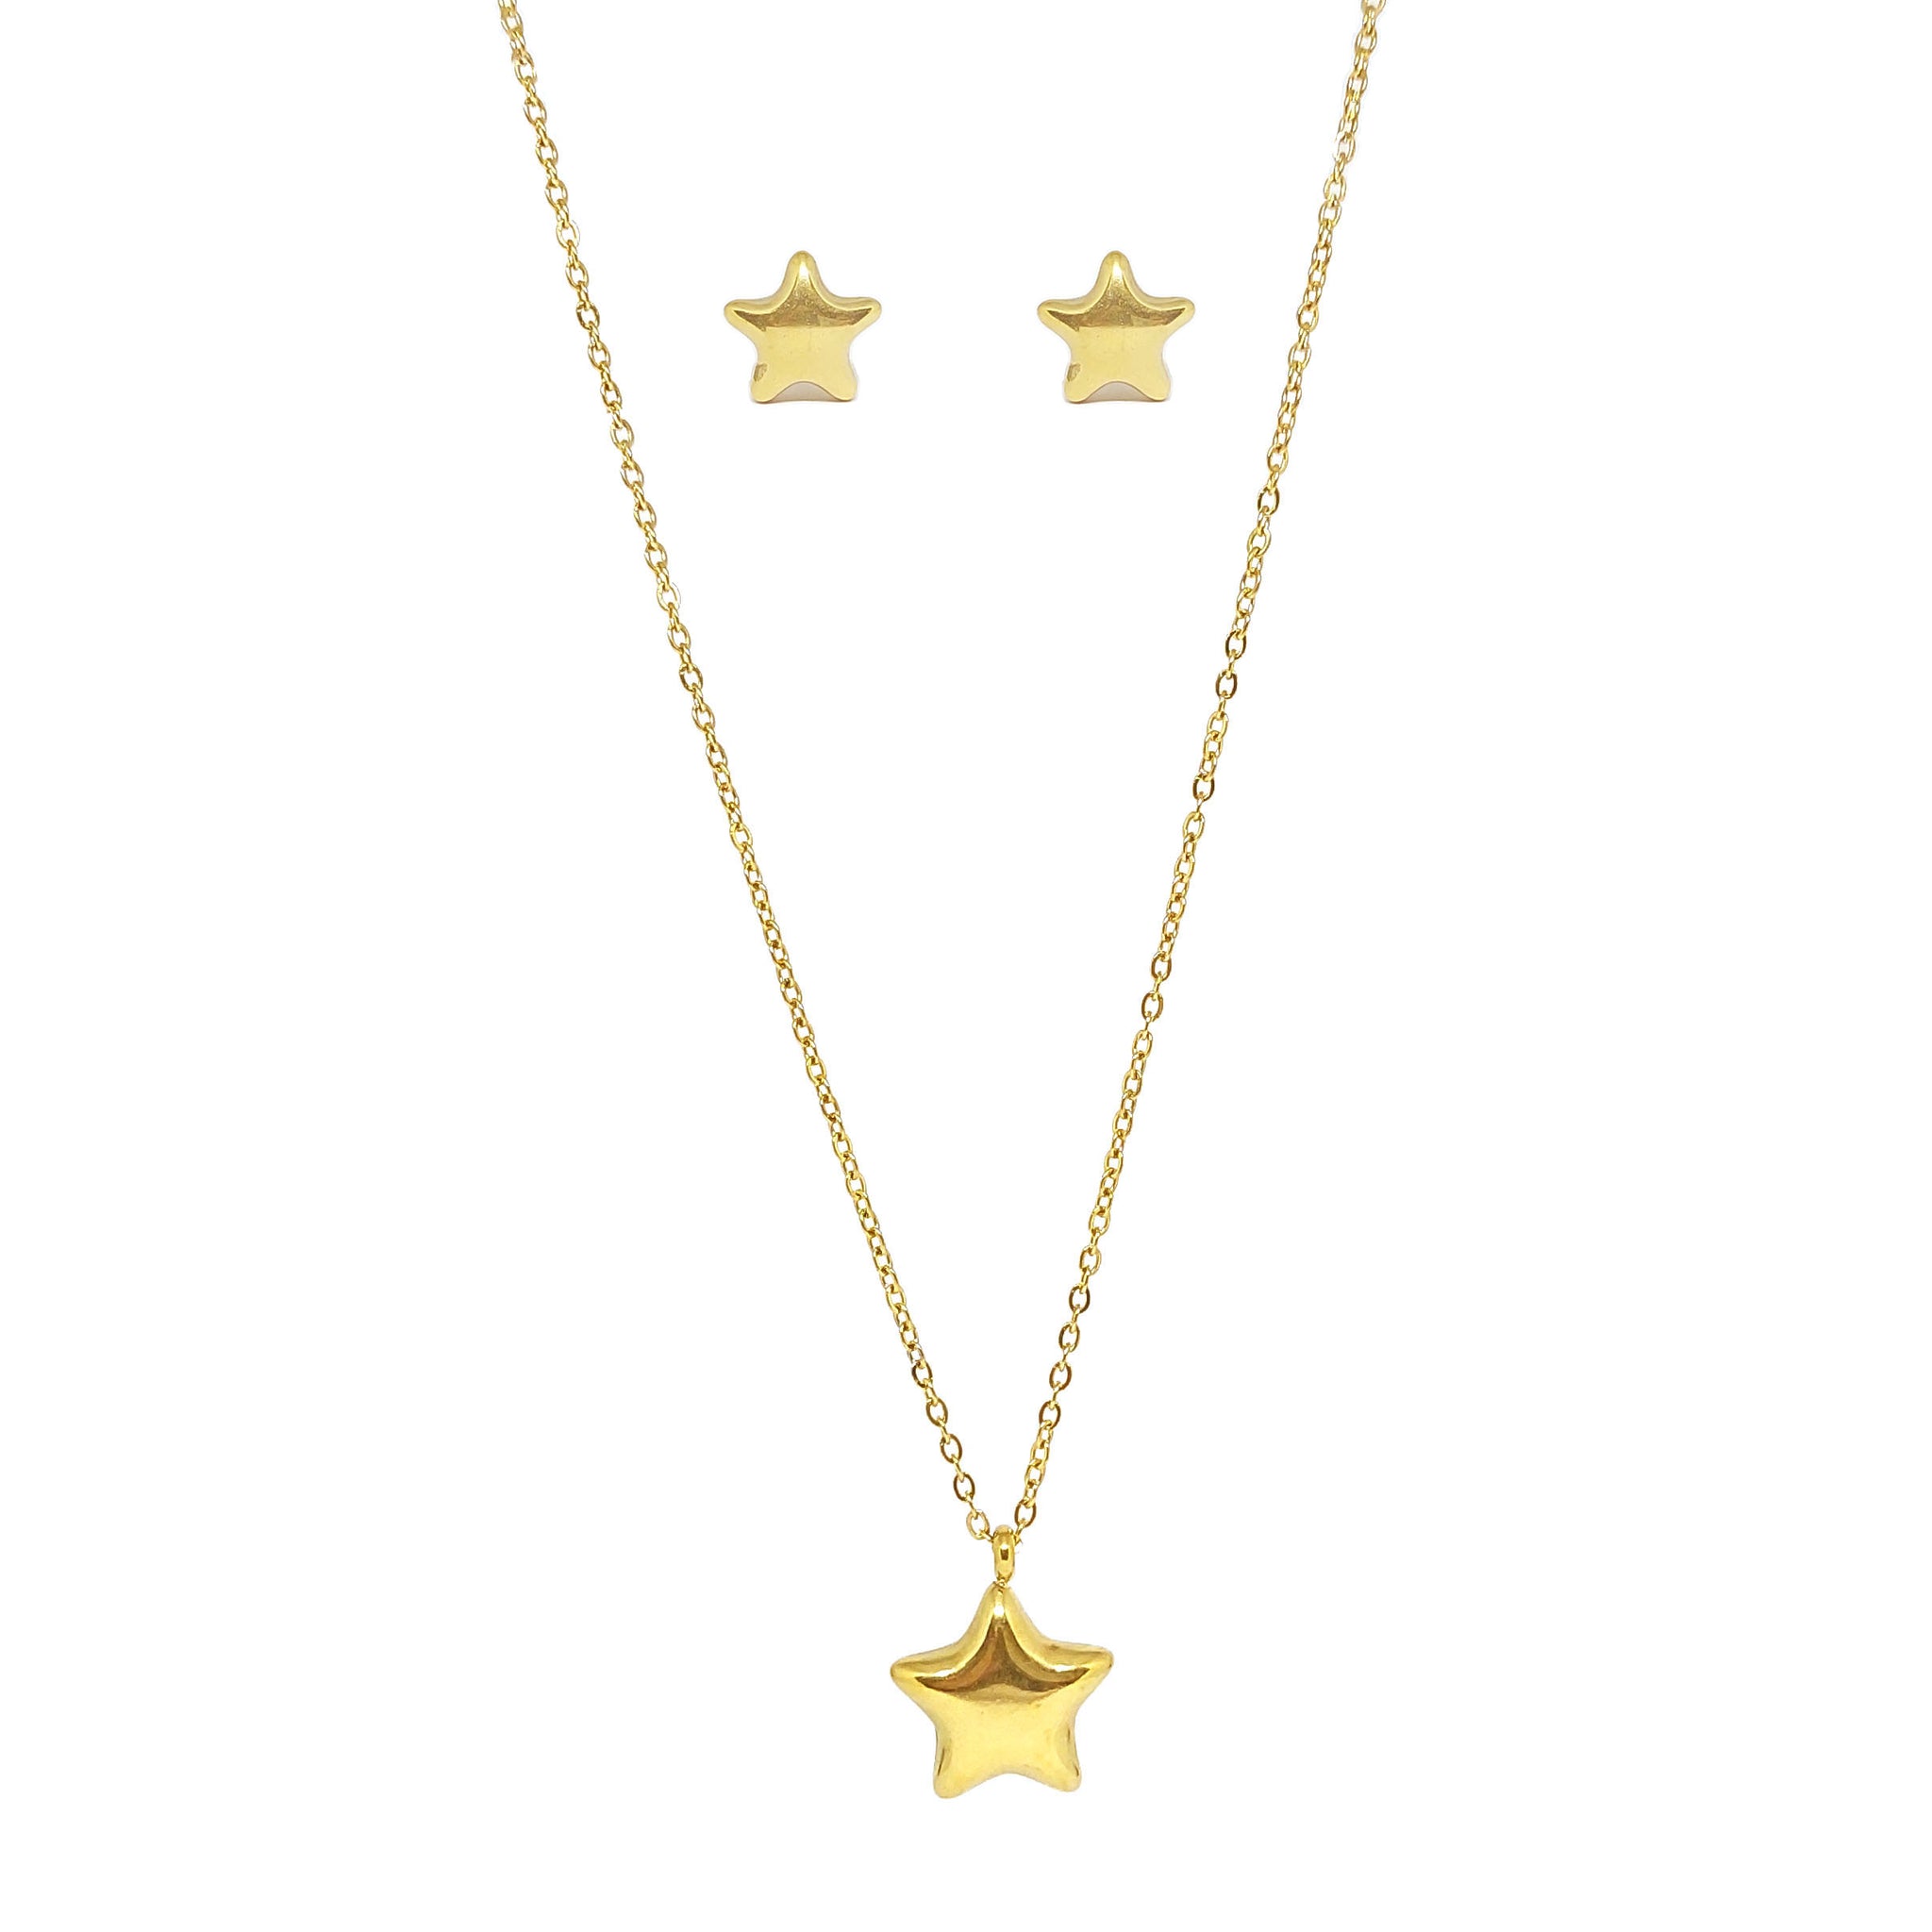 SET 7617: Solid Gold Plated Twinkle Star Set